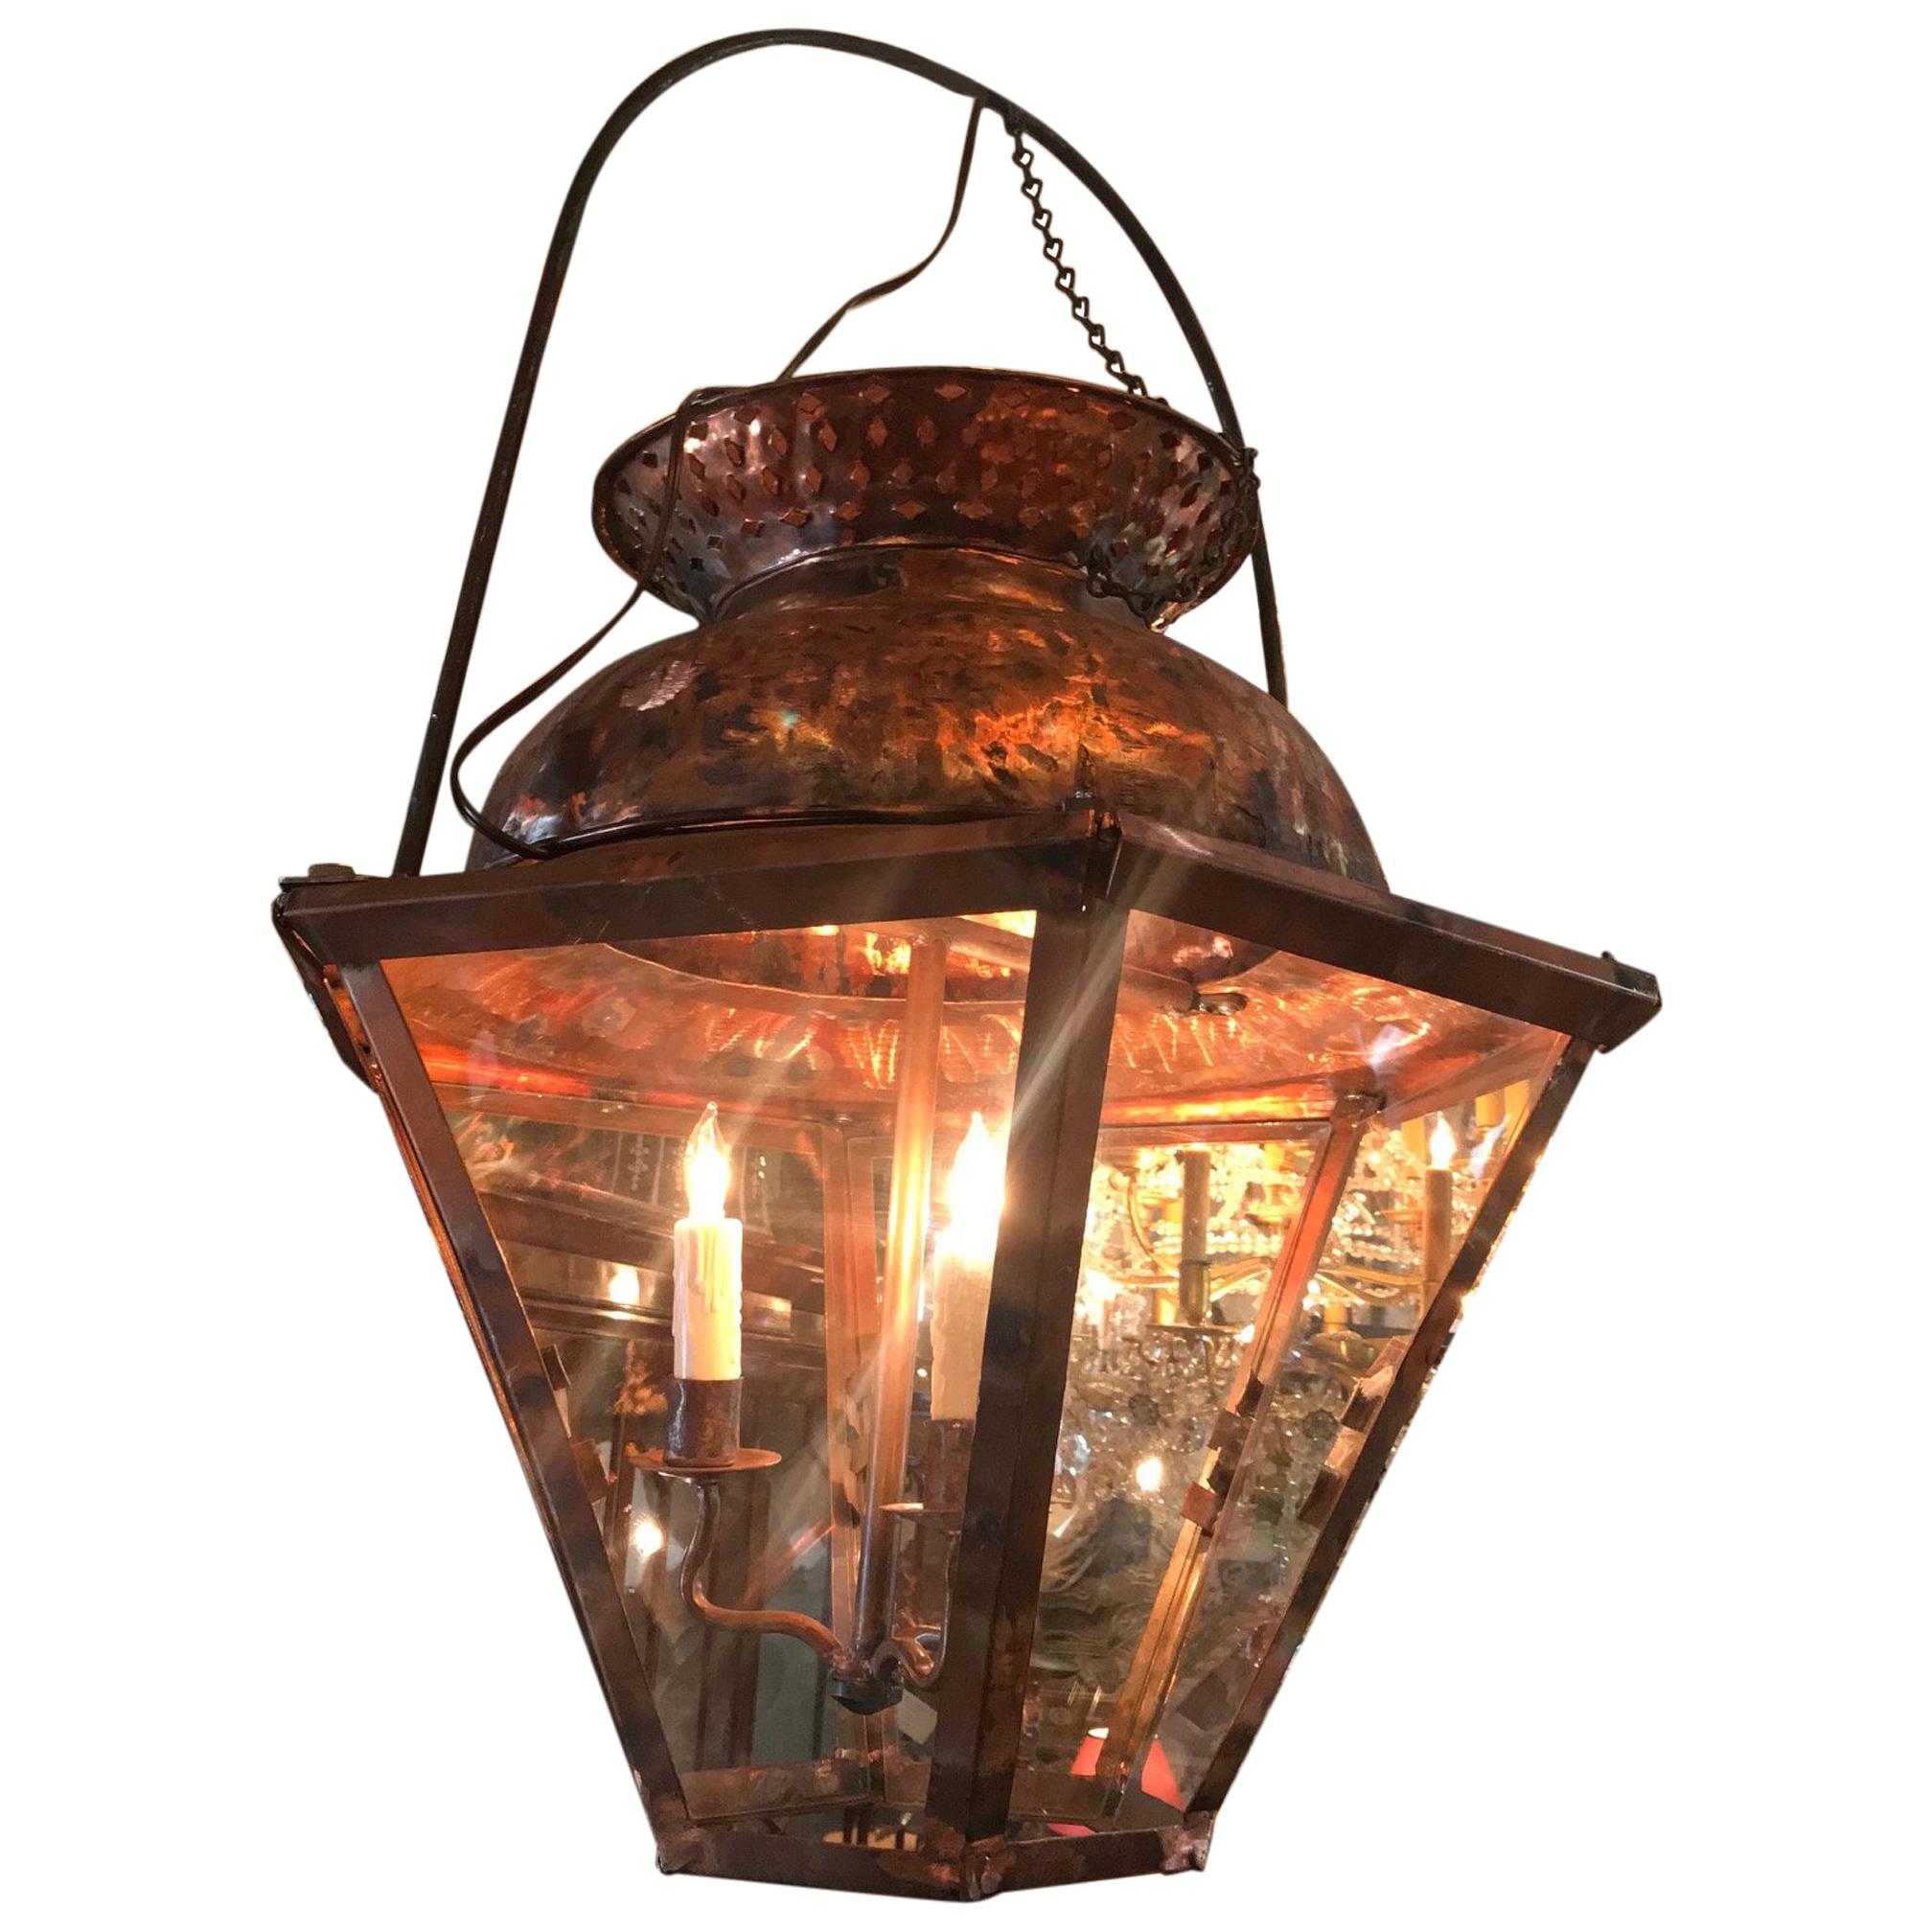 Hanging Lantern Ceiling Metal Copper Light Pendant  hand made rustic old style 